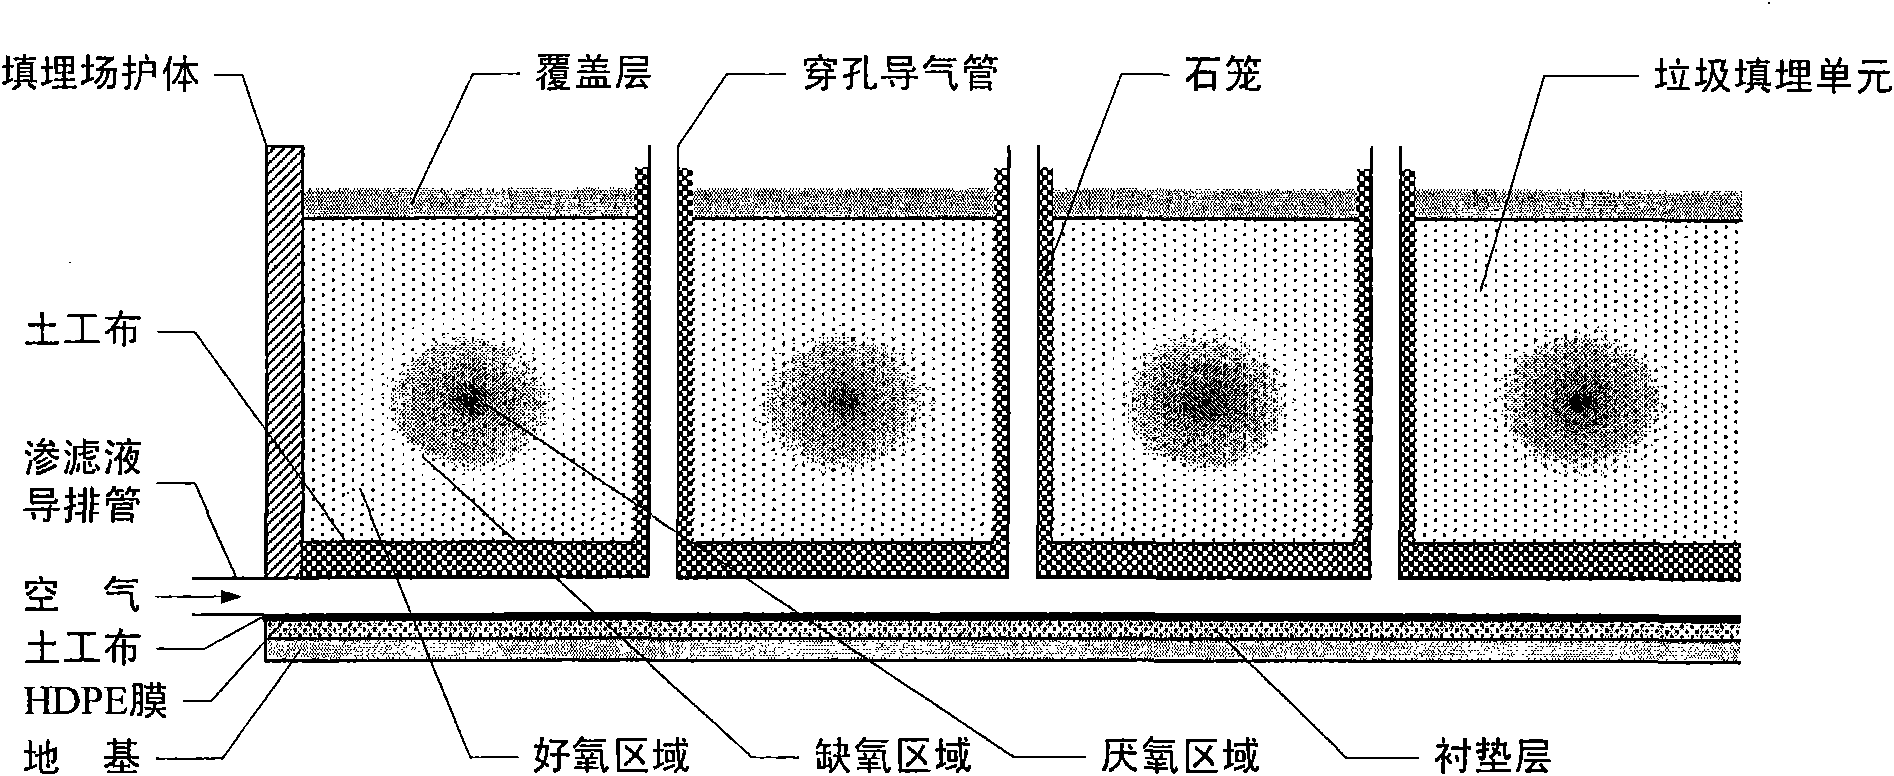 Improved urban domestic garbage landfilling structure and landfilling treatment method